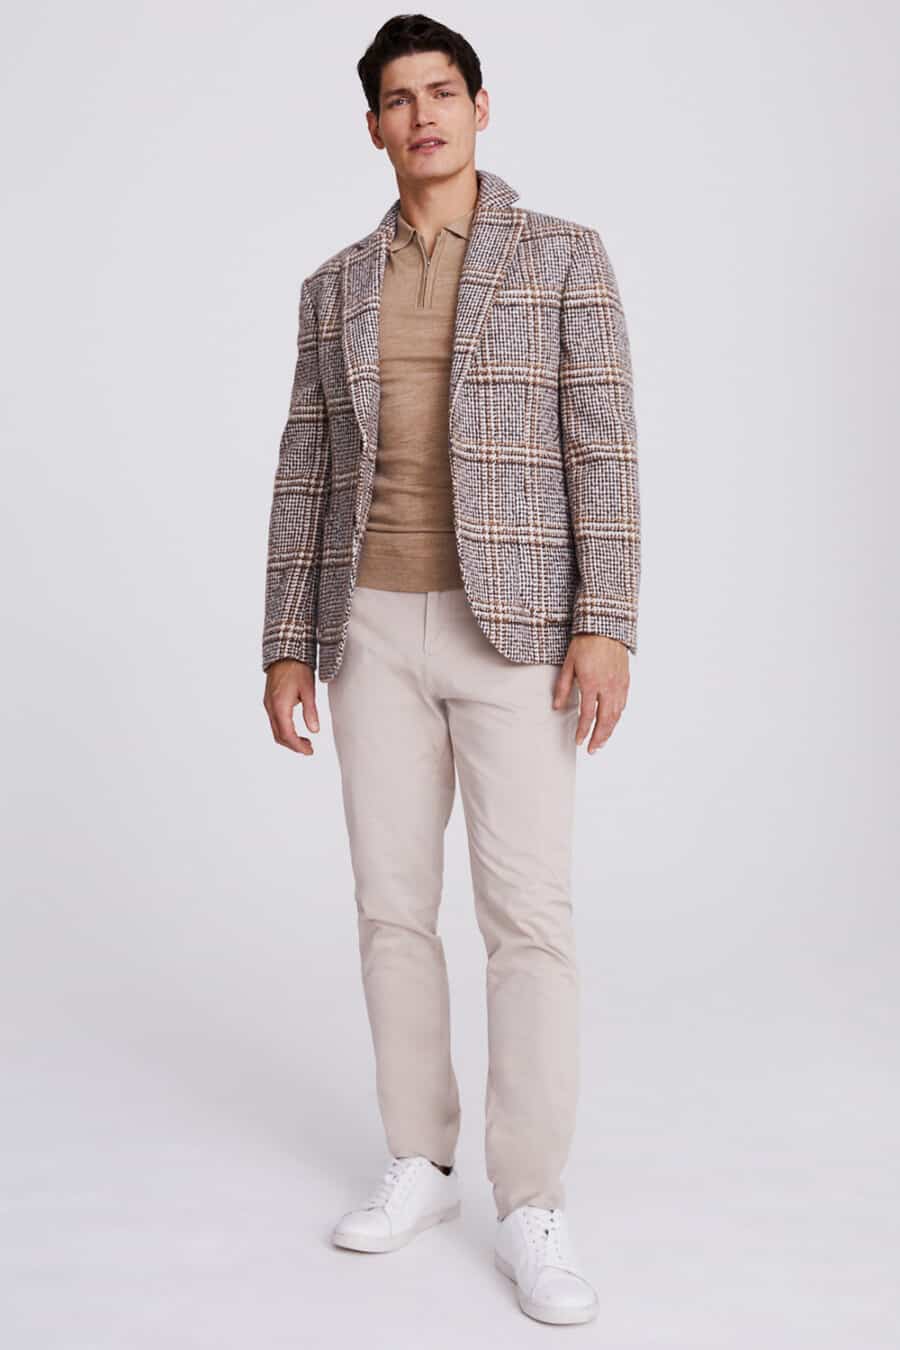 Men's stone grey chinos, brown zip-neck polo shirt, grey-brown checked blazer and white sneakers outfit